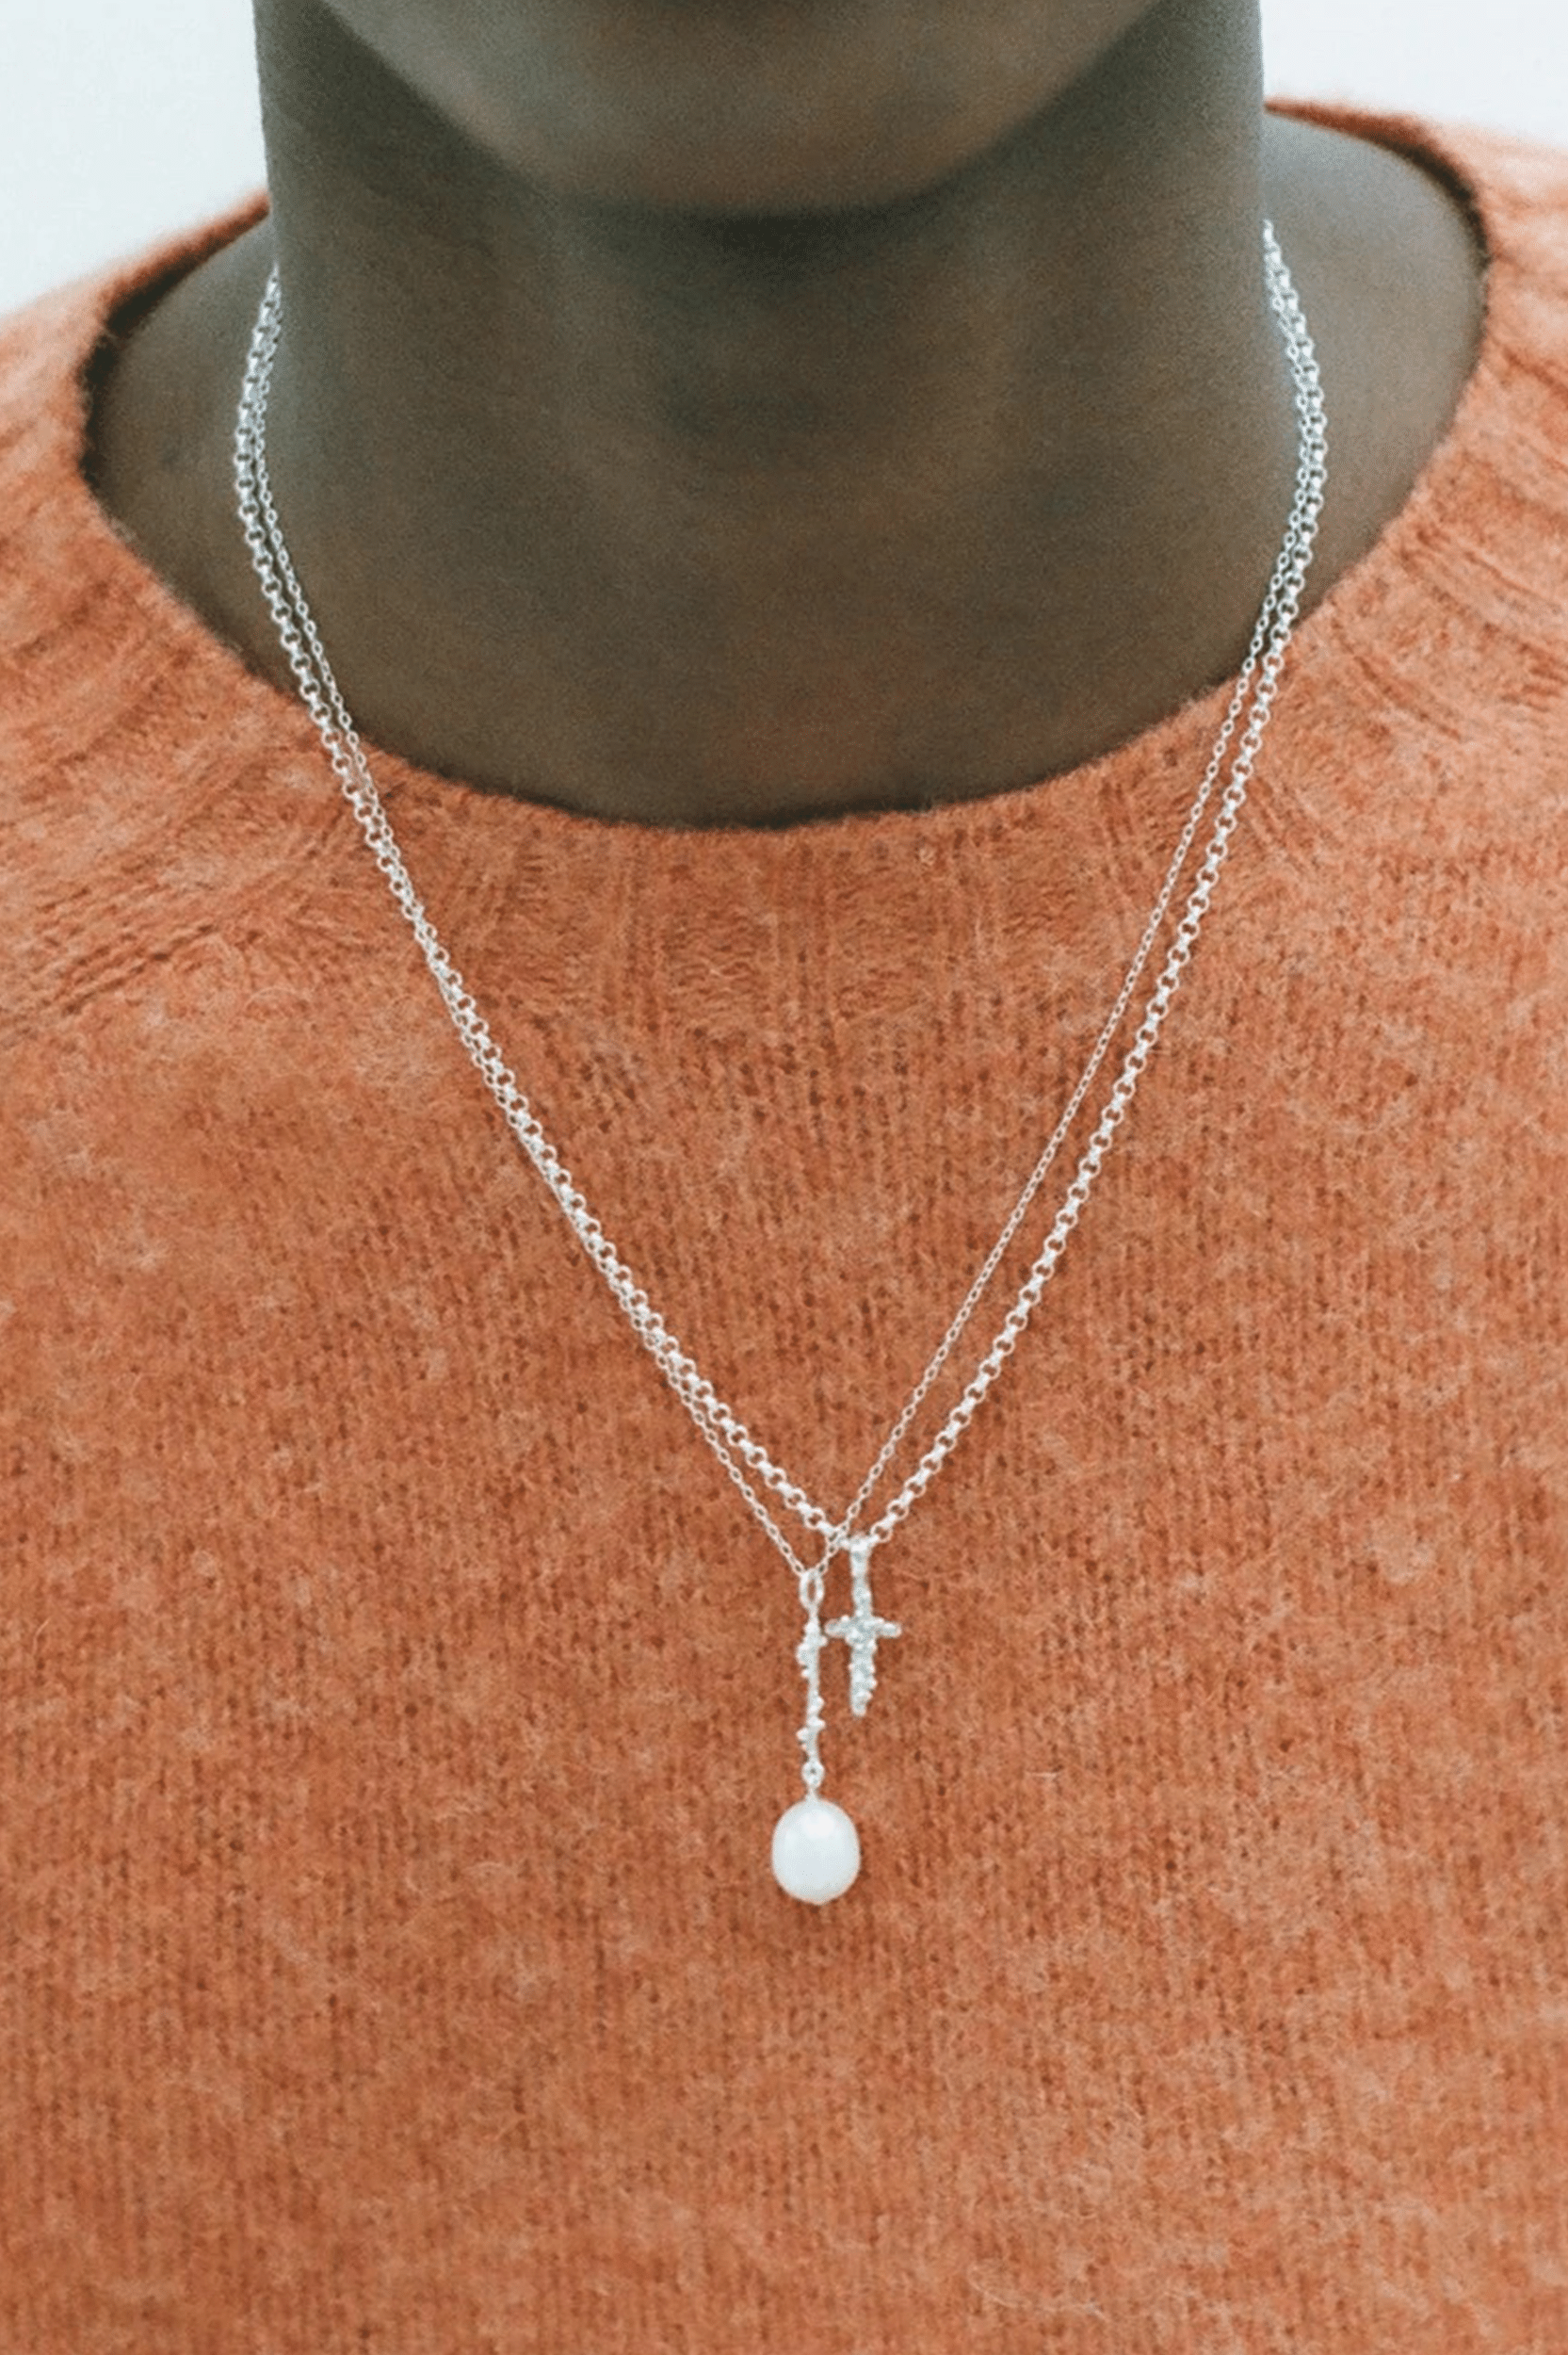 The Lustre of the Moon Necklace